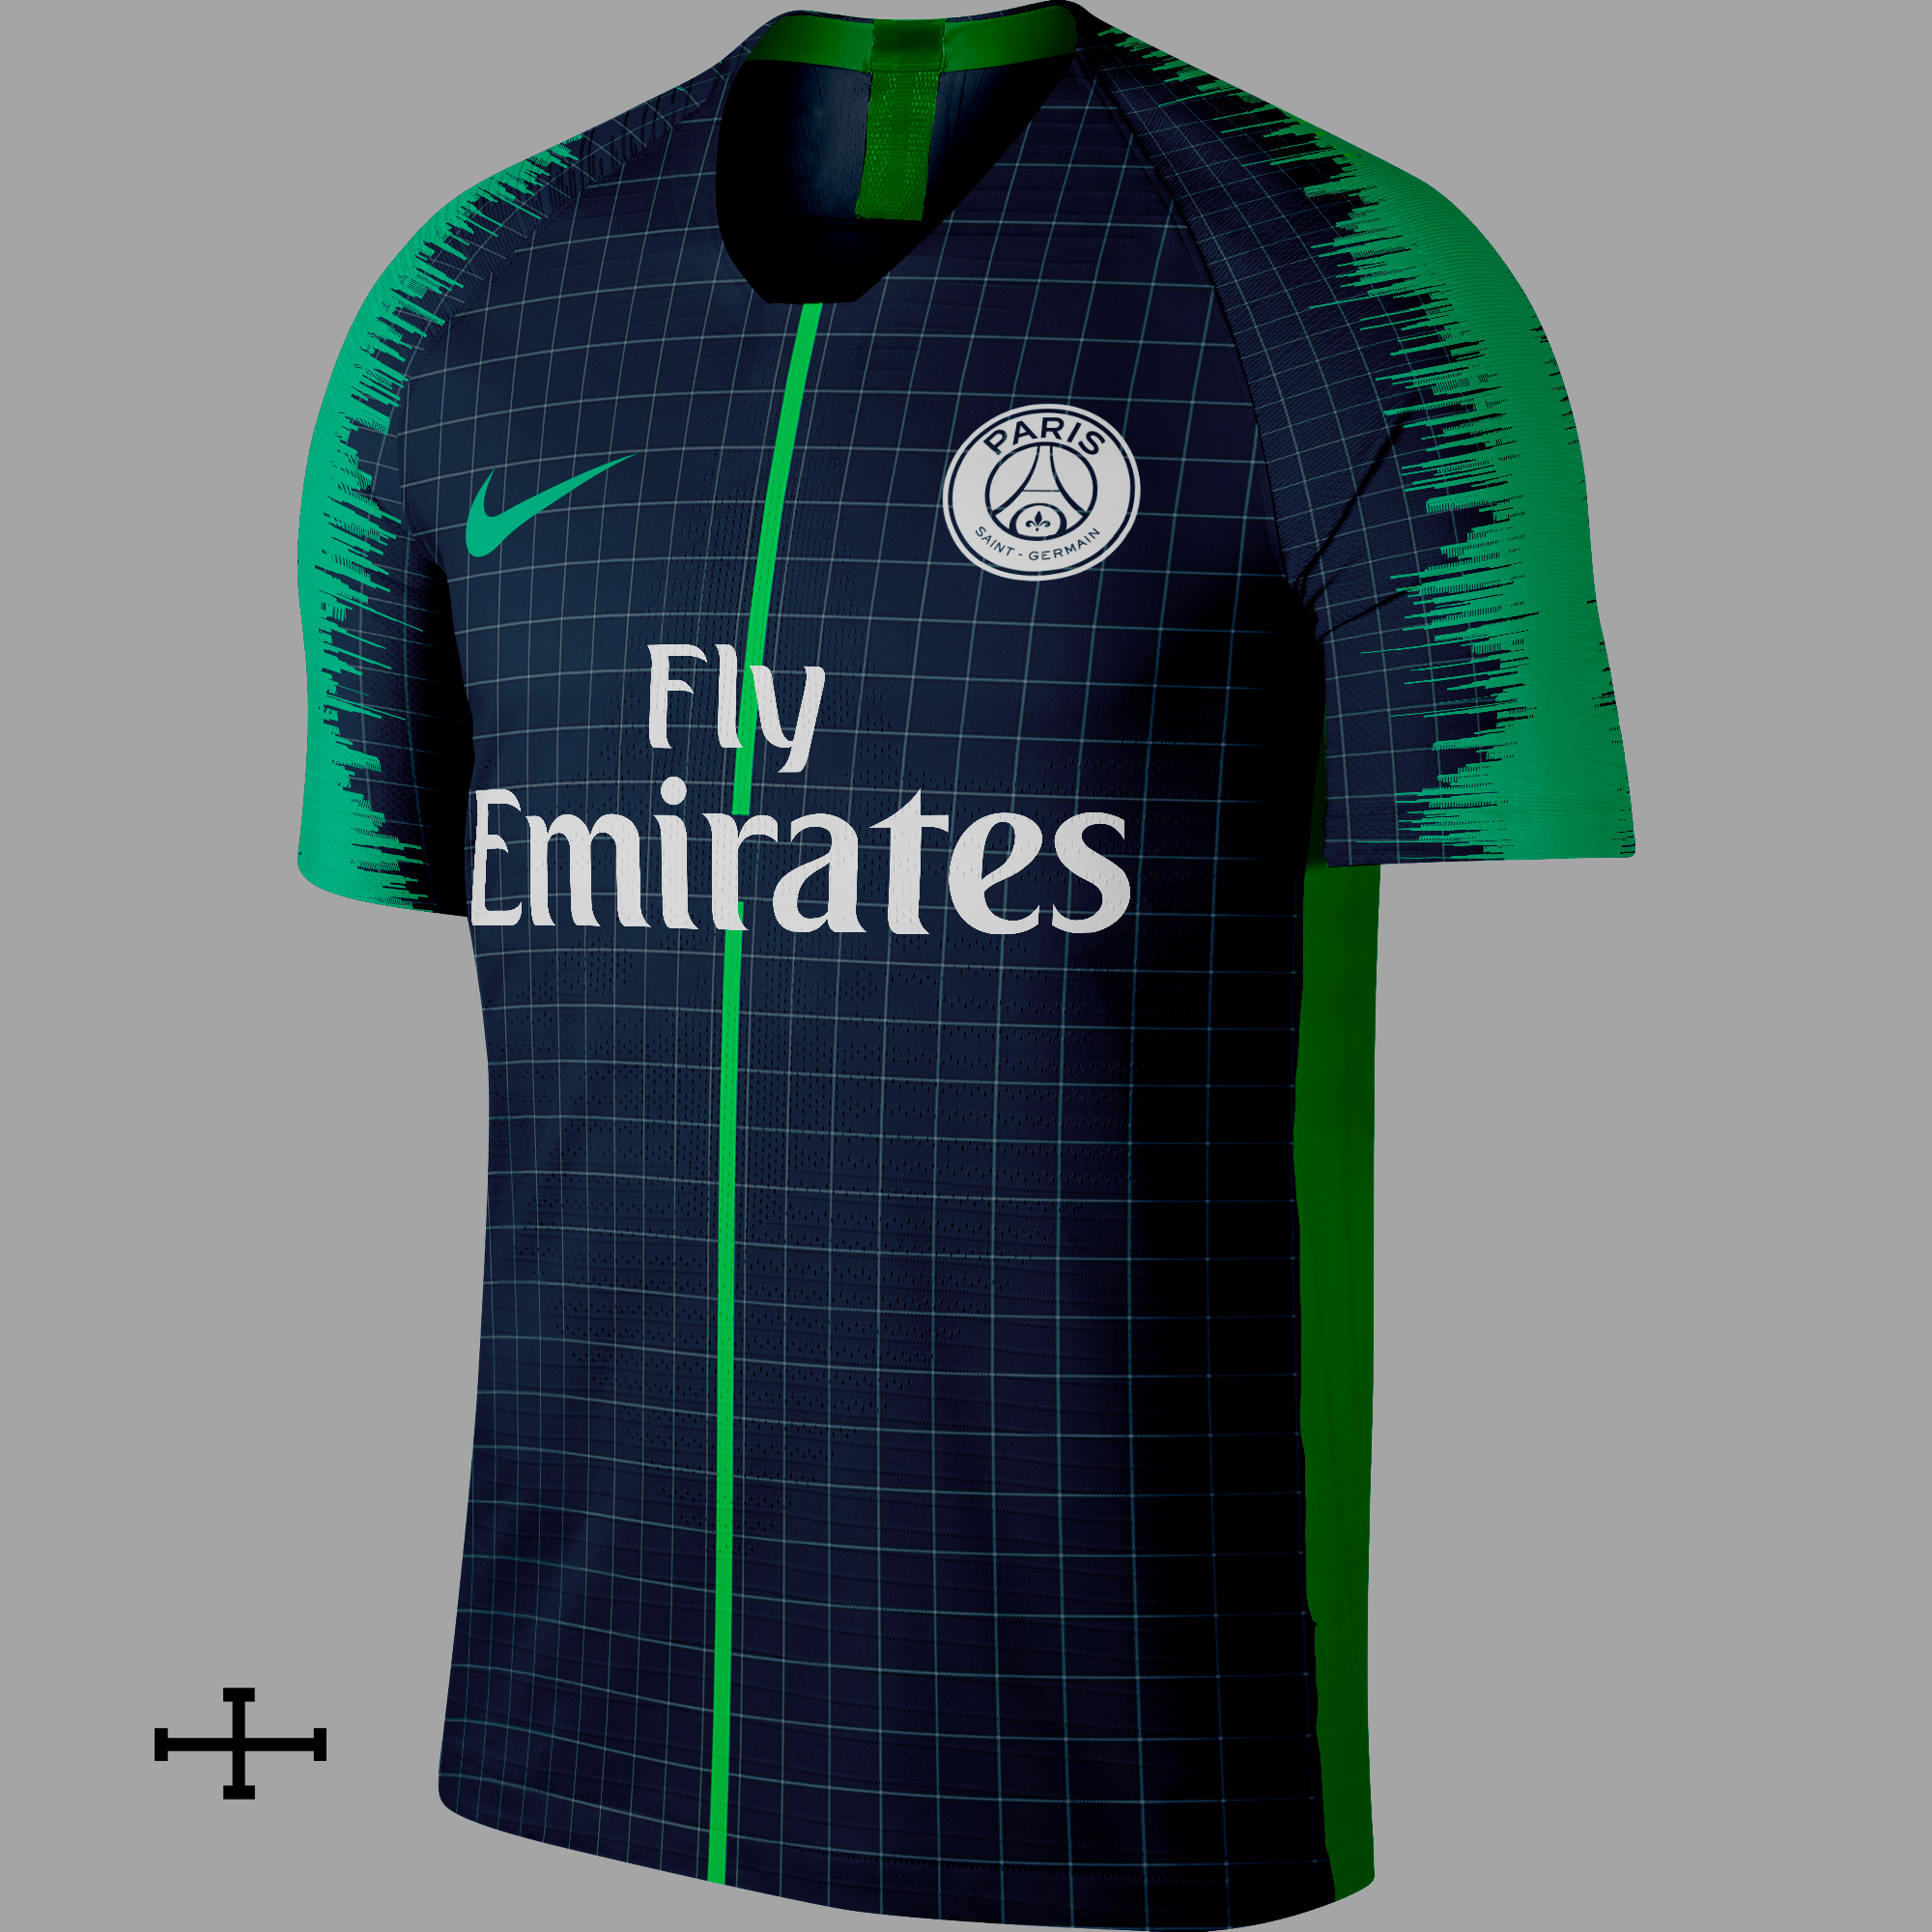 Download View 20+ Download Mockup Jersey Nike Psd